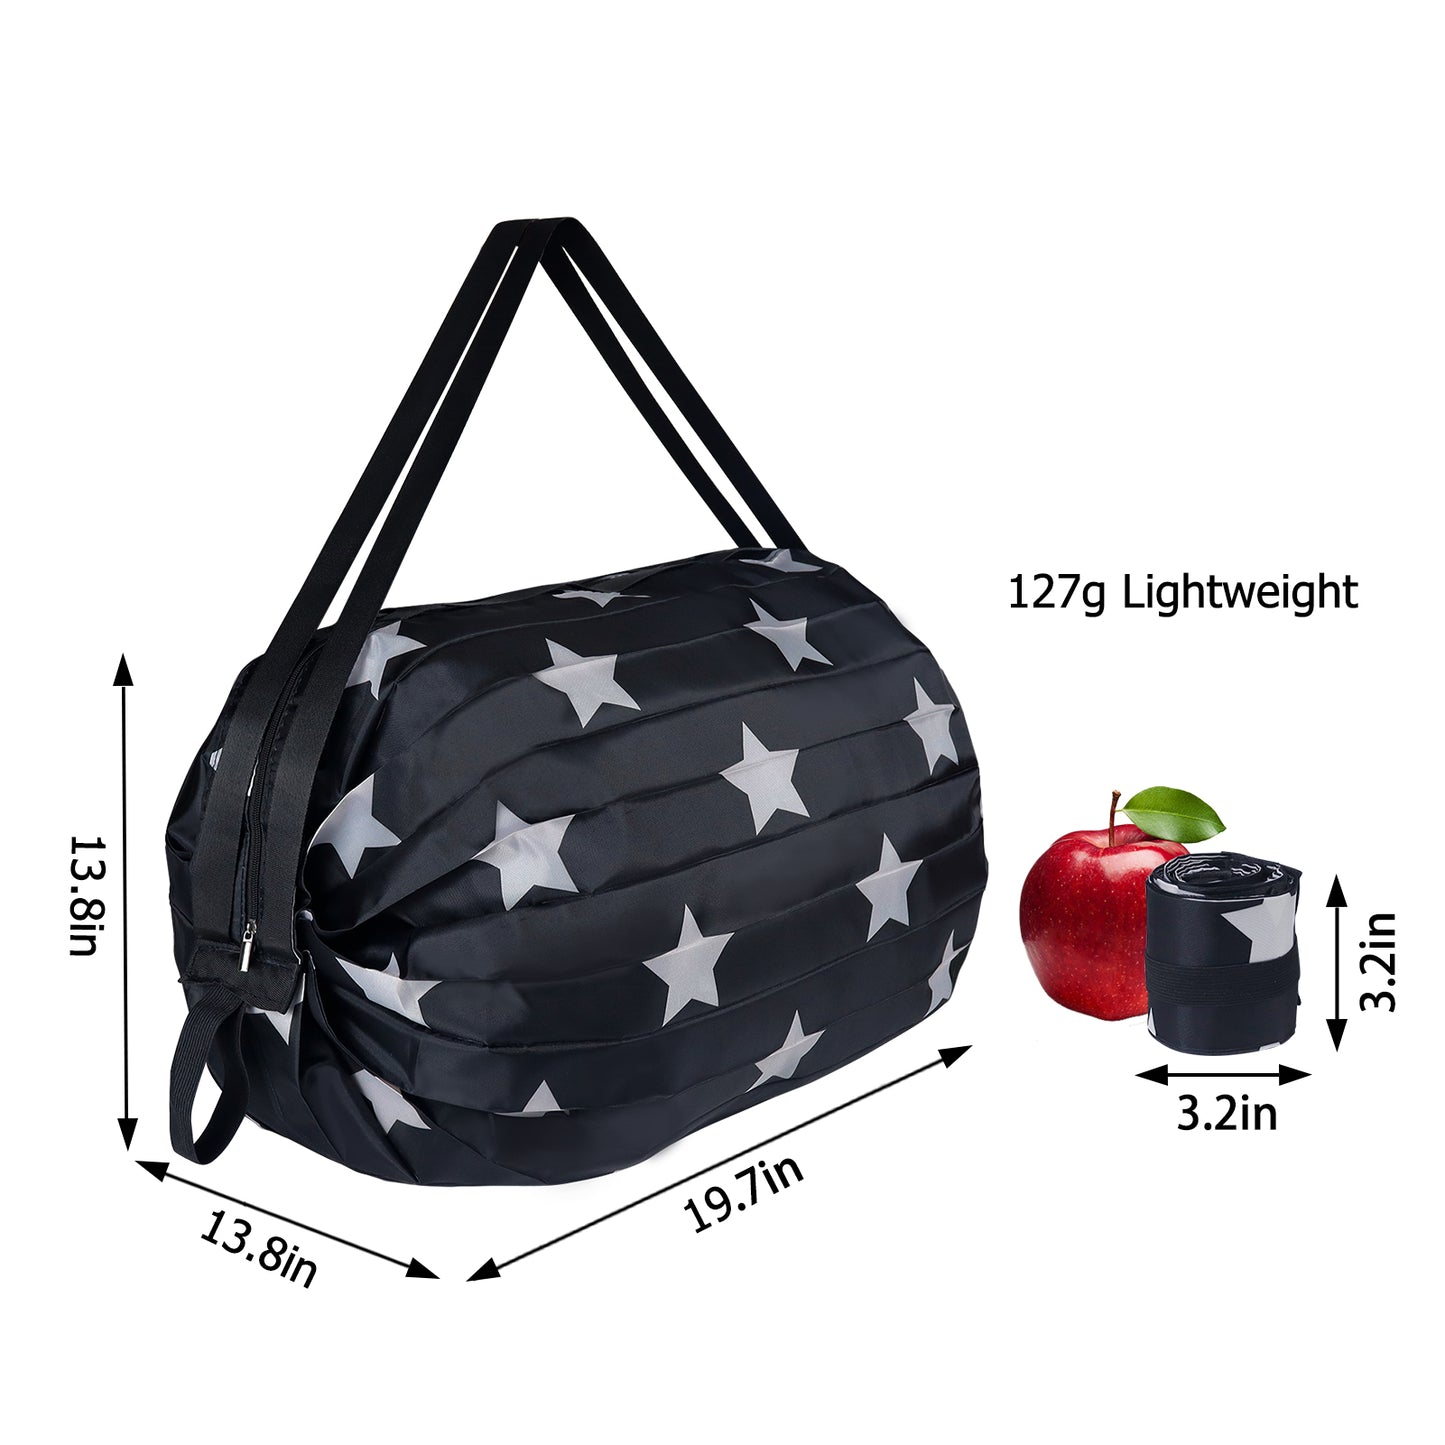 Wholesale Promotional Large Travel Luggage Cheap Price Duffle Bag Women's  Duffle Gym bags for man and women From m.